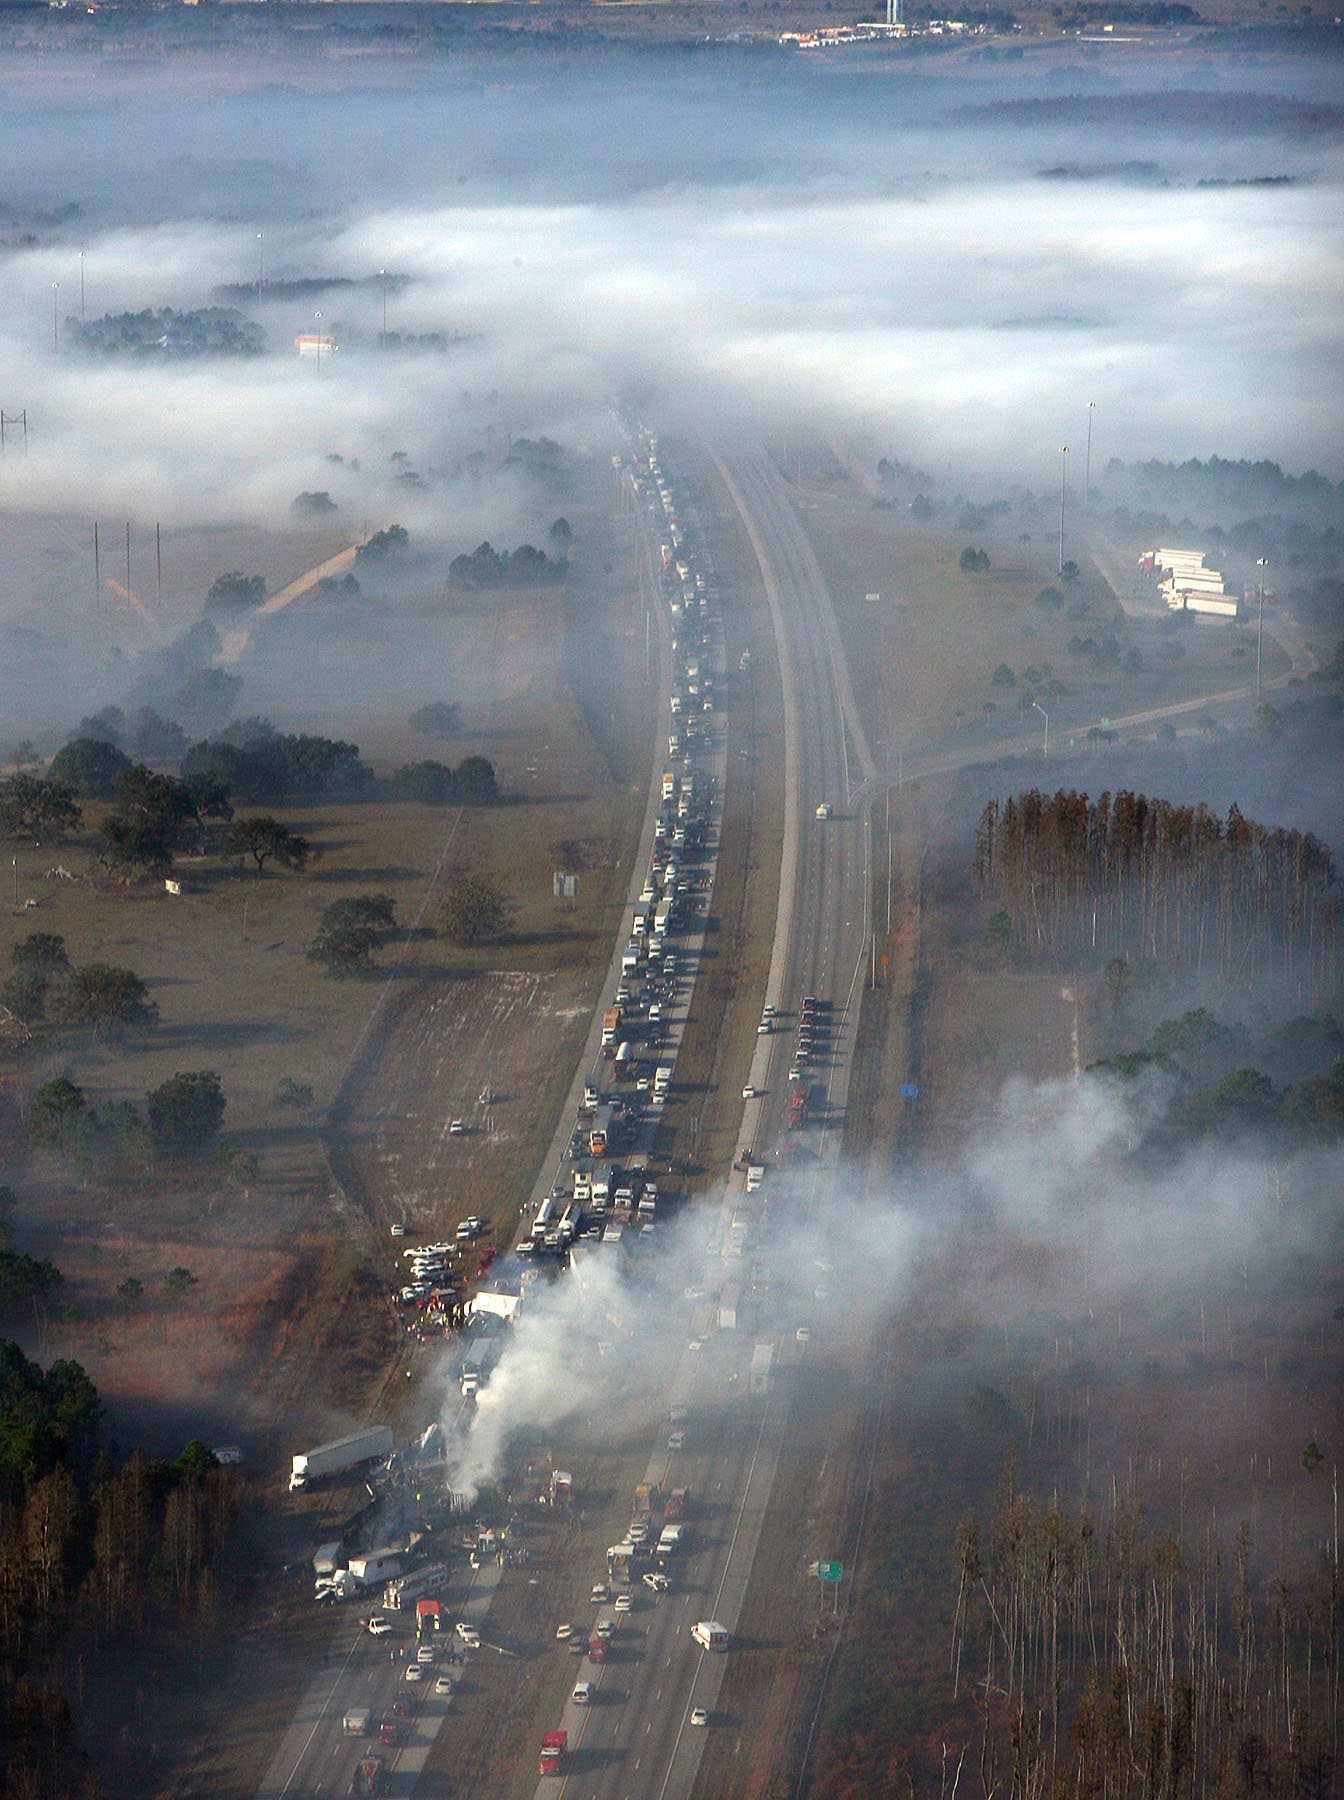 An image of a massive car accident caused by a superfog